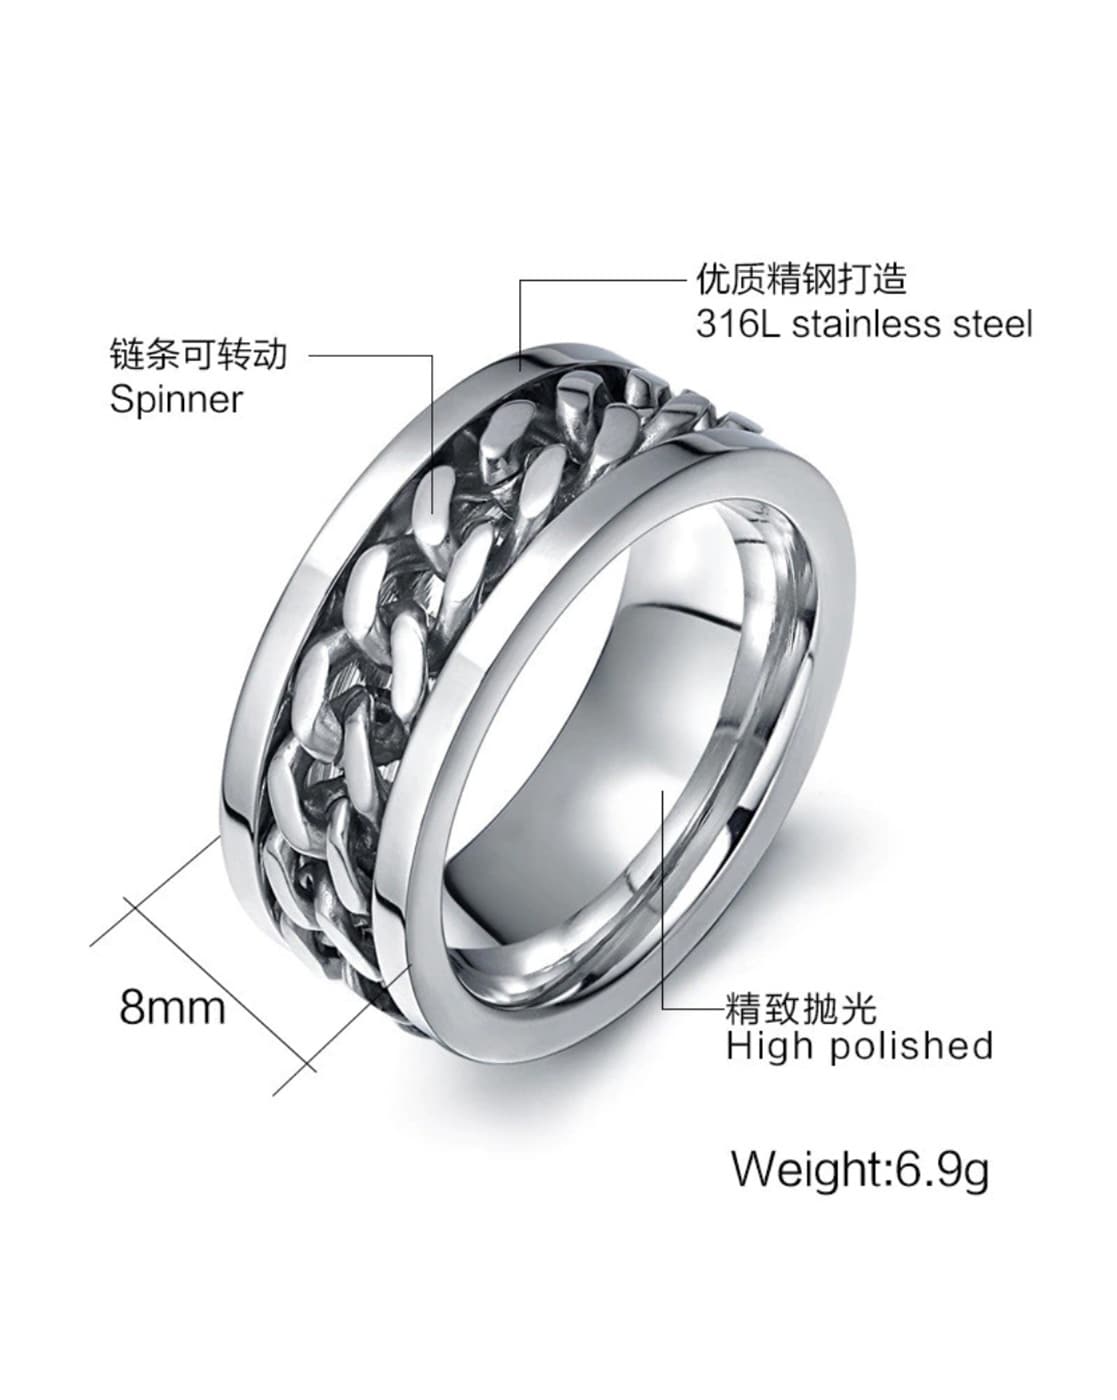 Body Shape Ring 316l Stainless Steel Rings 3d Women Gothic Punk Motorcycle  | eBay